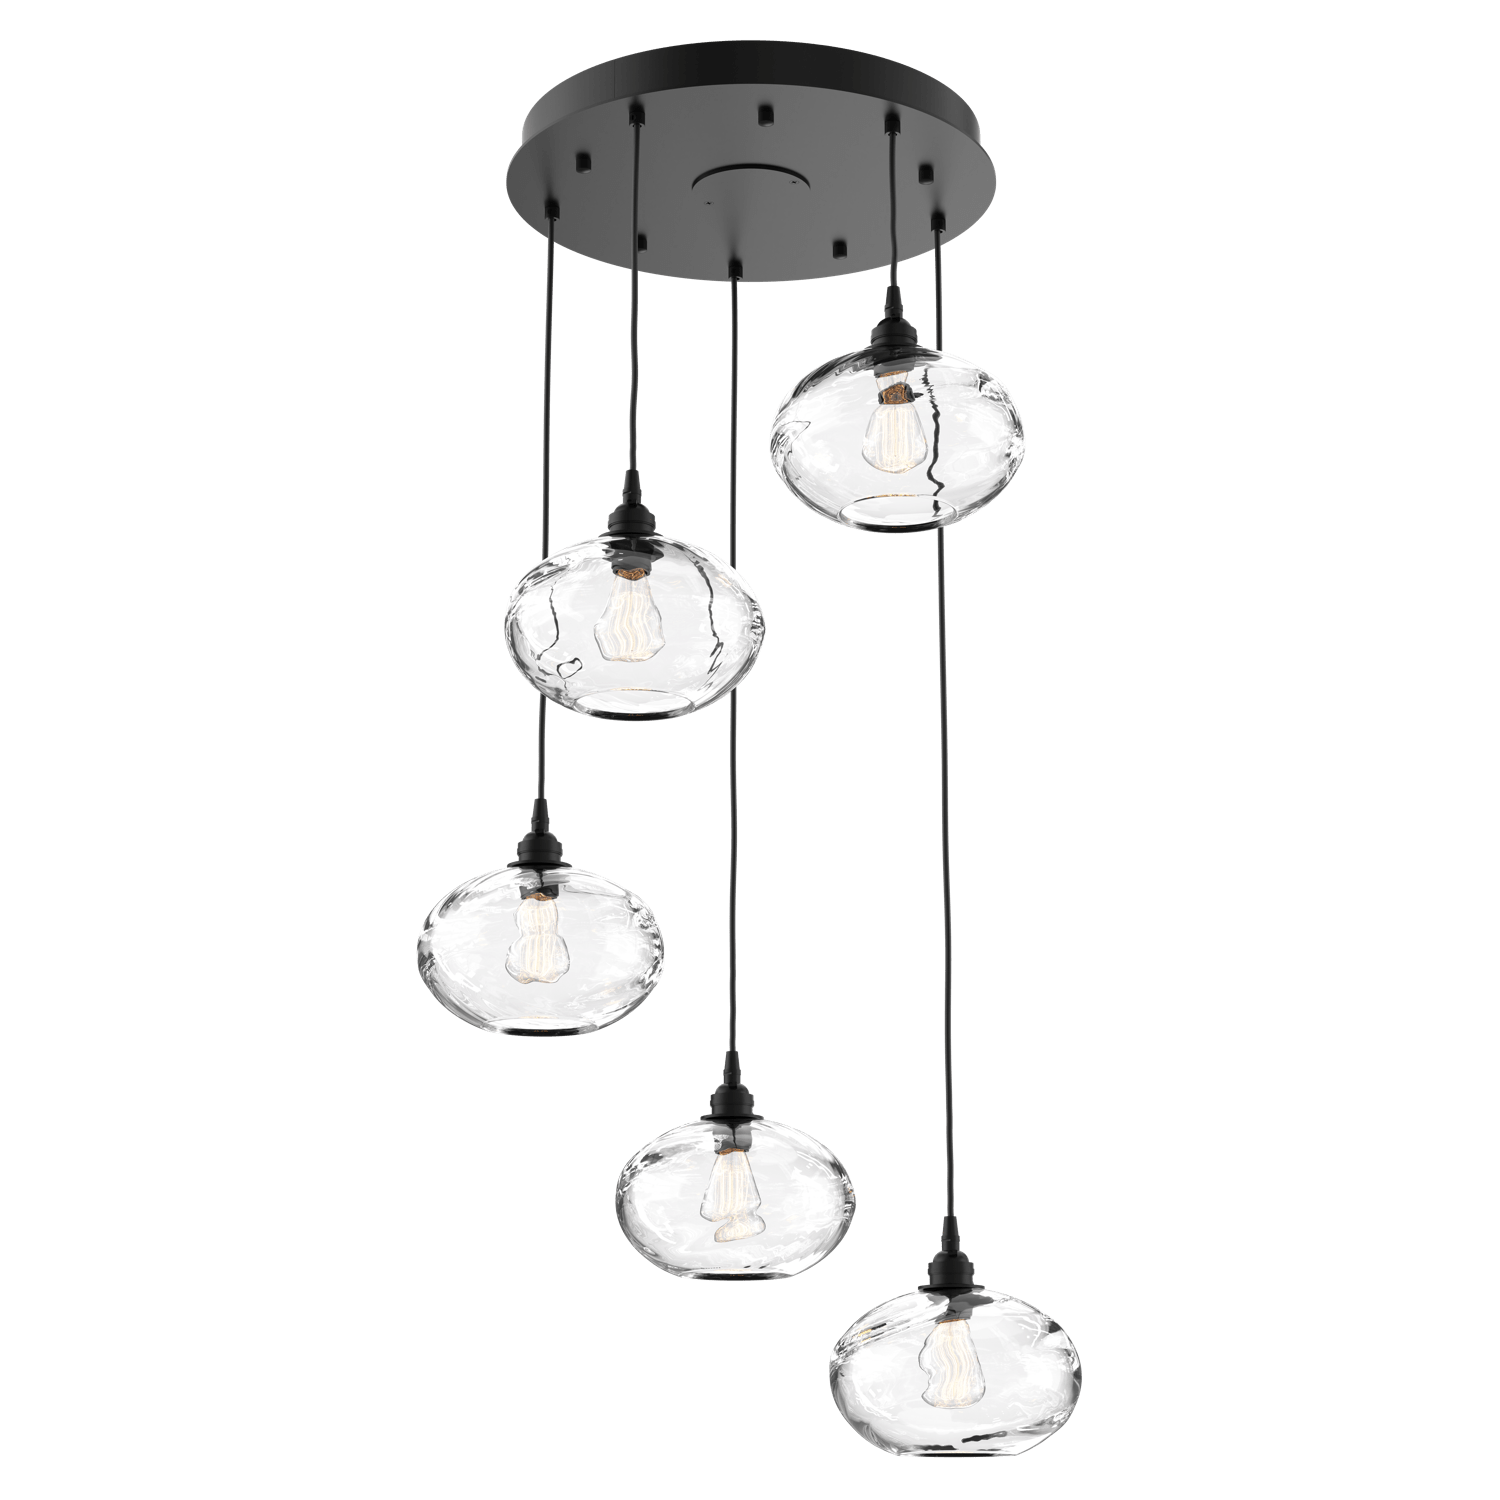 CHB0036-05-MB-OC-Hammerton-Studio-Optic-Blown-Glass-Coppa-5-light-round-pendant-chandelier-with-matte-black-finish-and-optic-clear-blown-glass-shades-and-incandescent-lamping